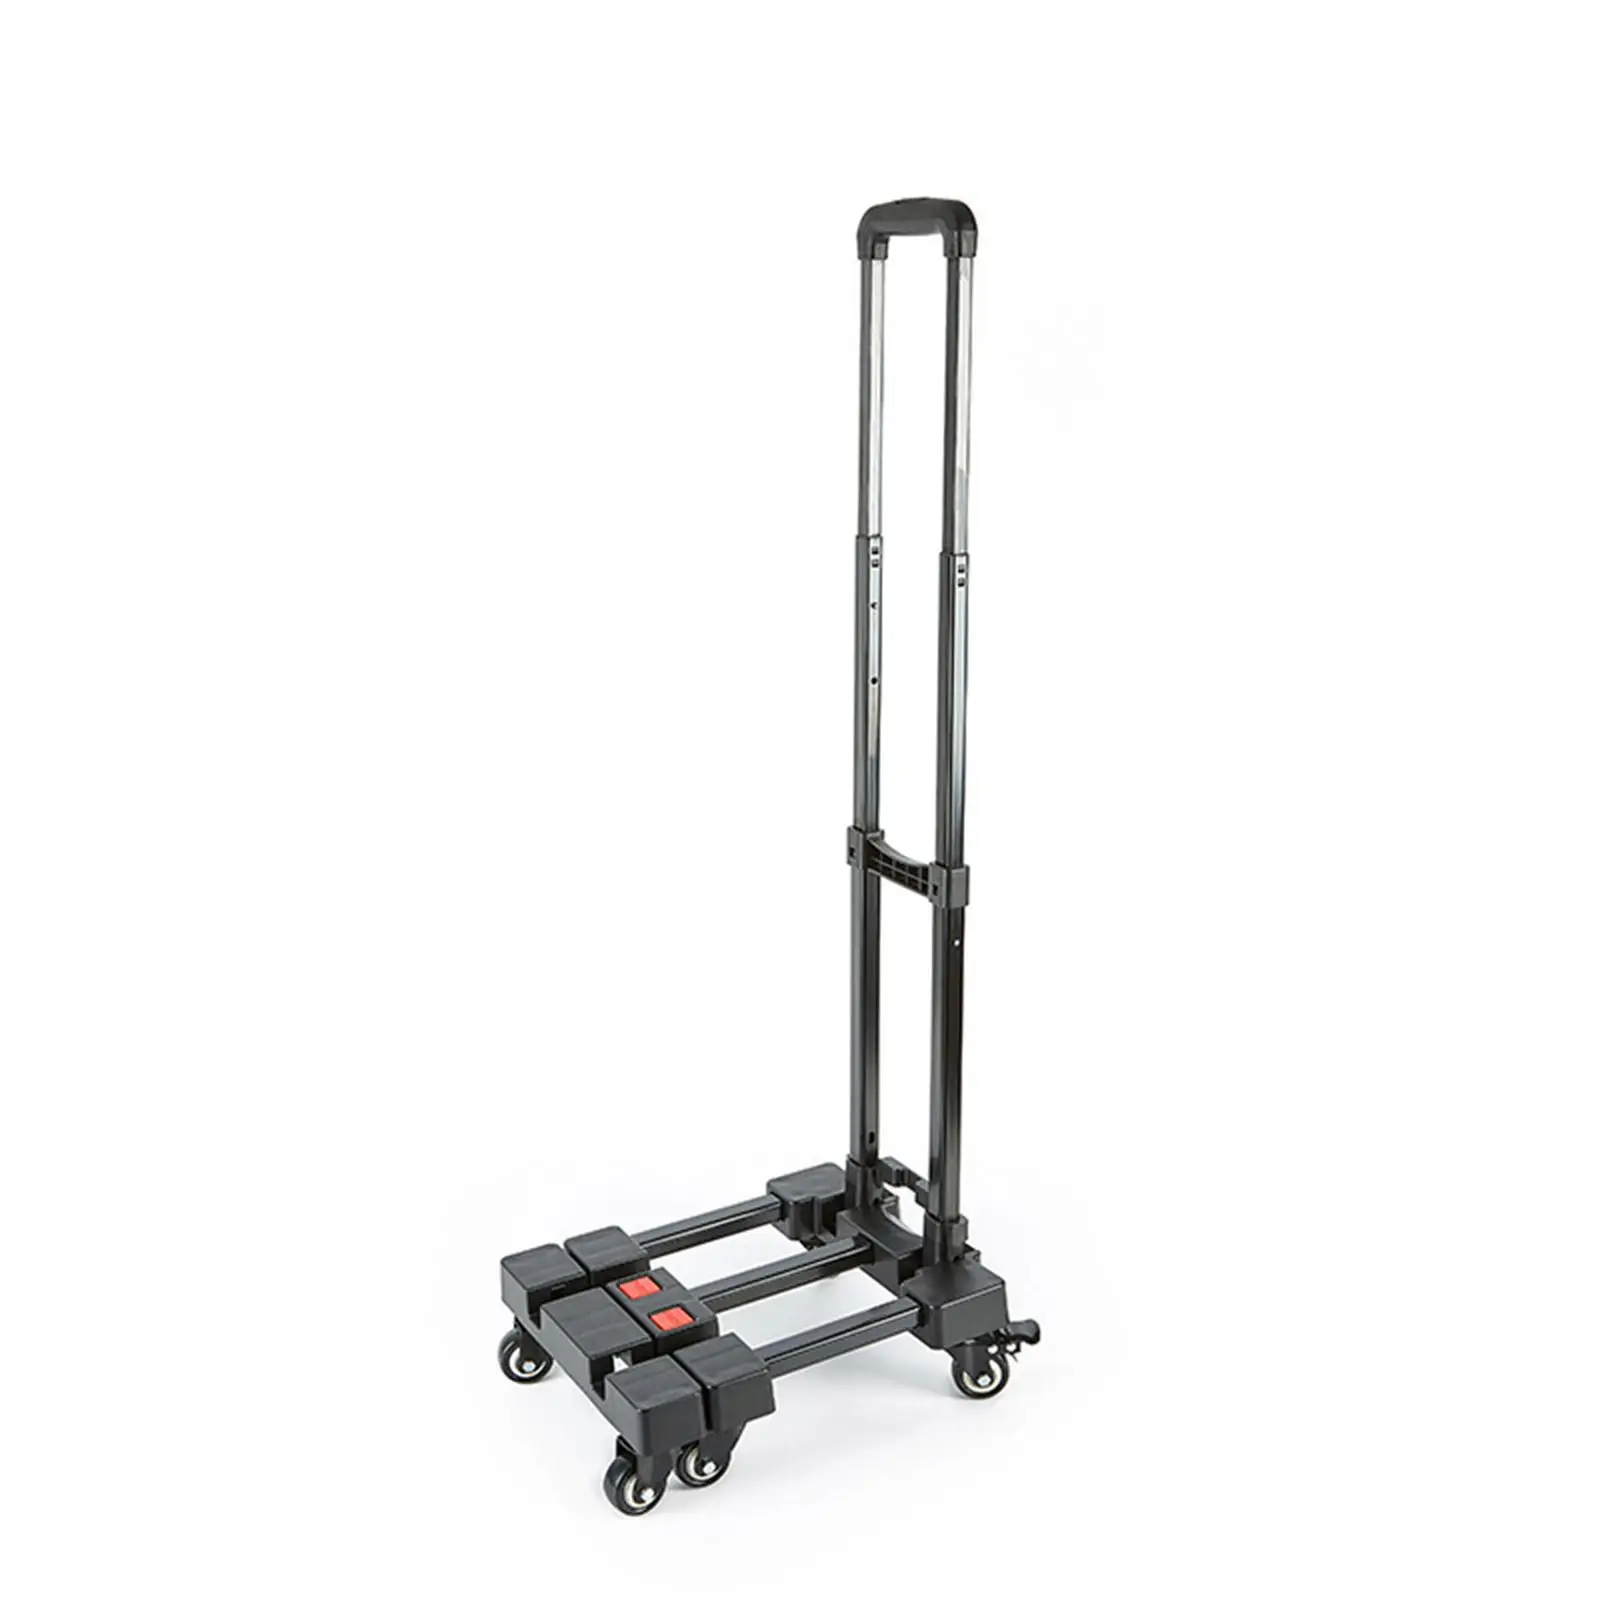 Folding Hand Truck with Adjustable Handle Moving Luggages Cart for Moving Shopping Office 100kg (220lb) Load Capacity